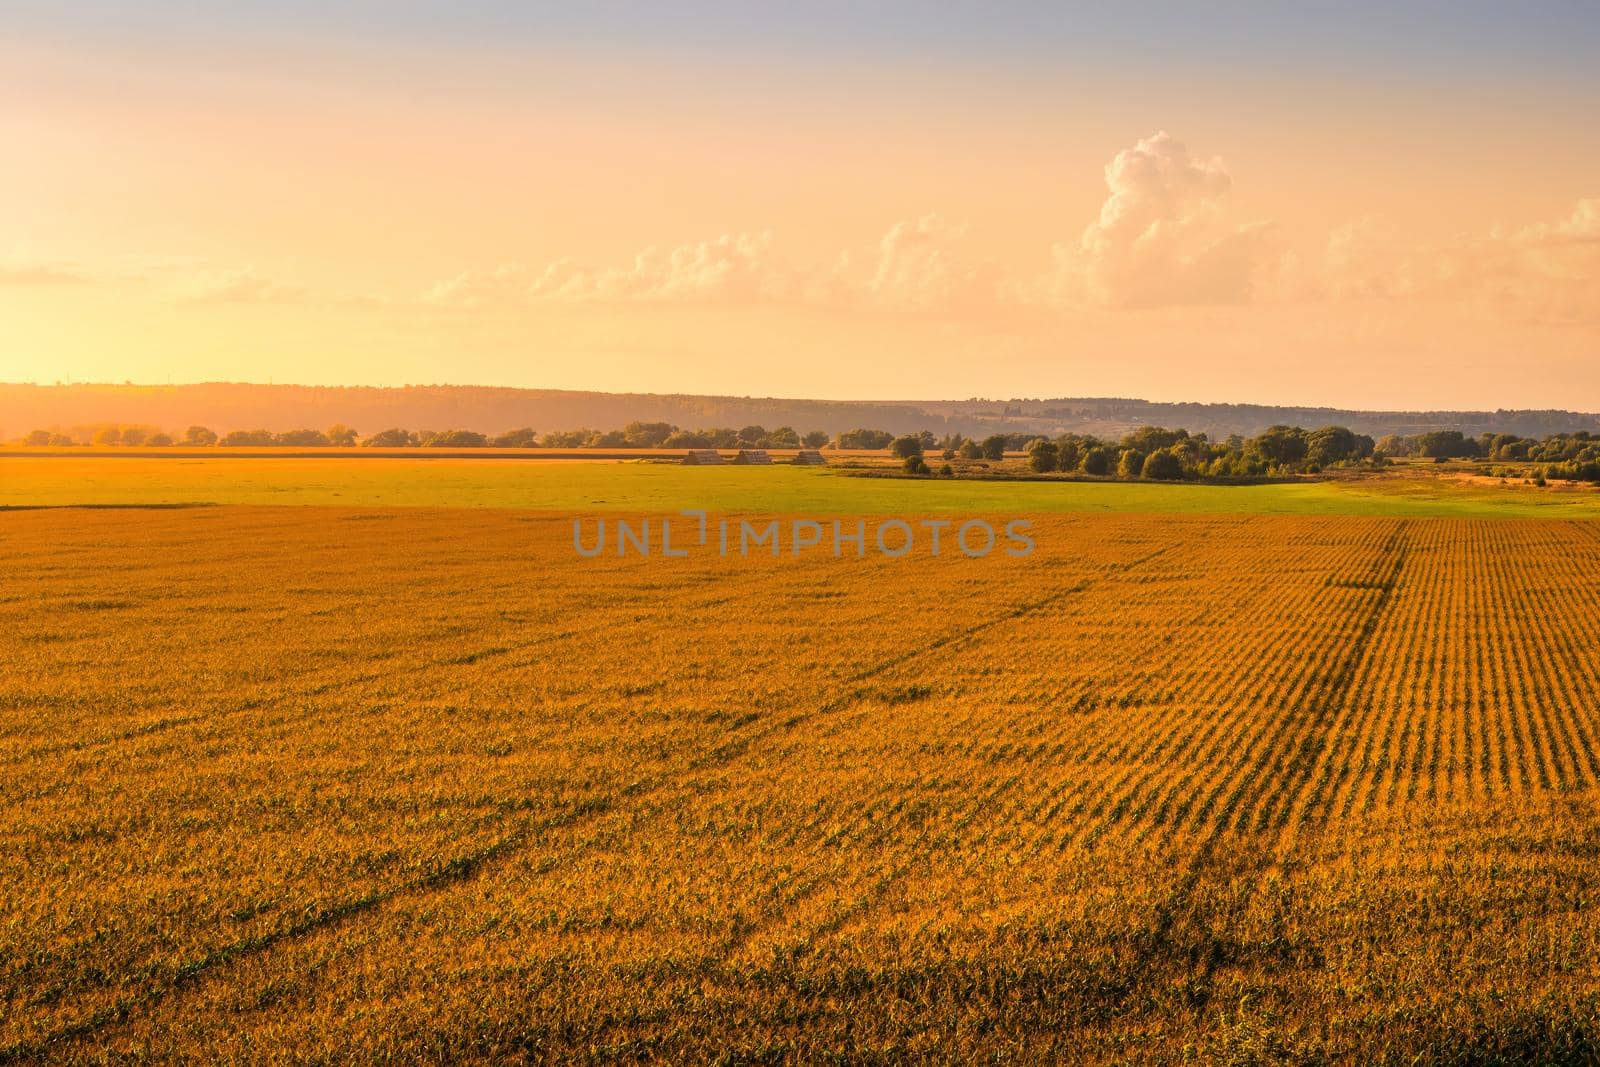 Top view to the rows of young corn in an agricultural field at sunset or sunrise. Rural landscape.